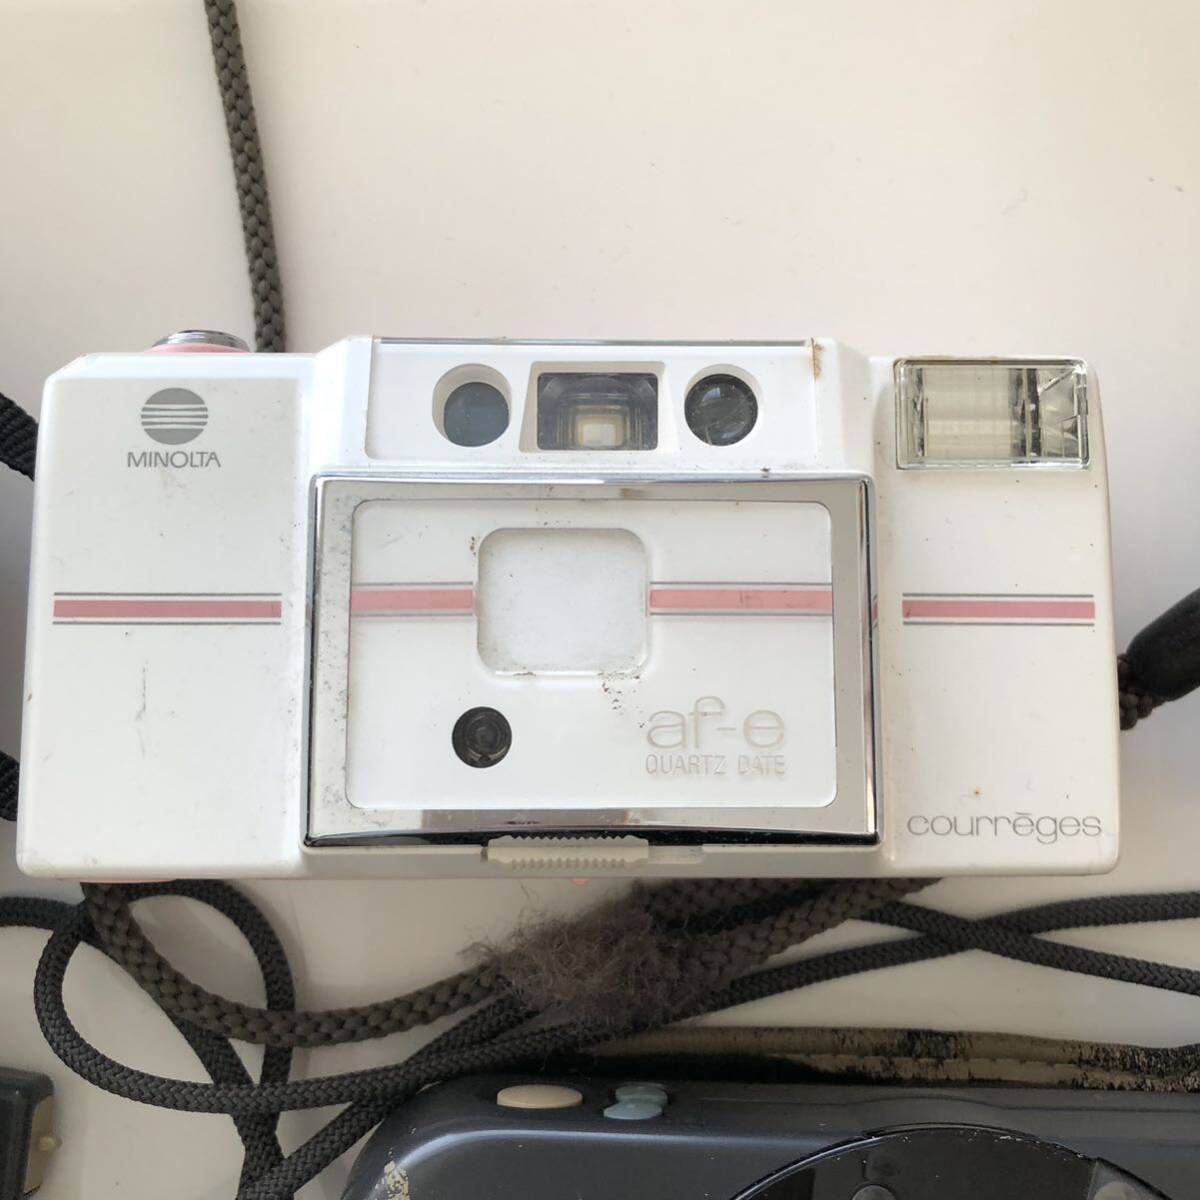 CANON Autoboy A オリンパス　AF-1　AF-10 ZOOM90 ミノルタ　af-s courreges　他　コンパクトカメラまとめ７台_画像3